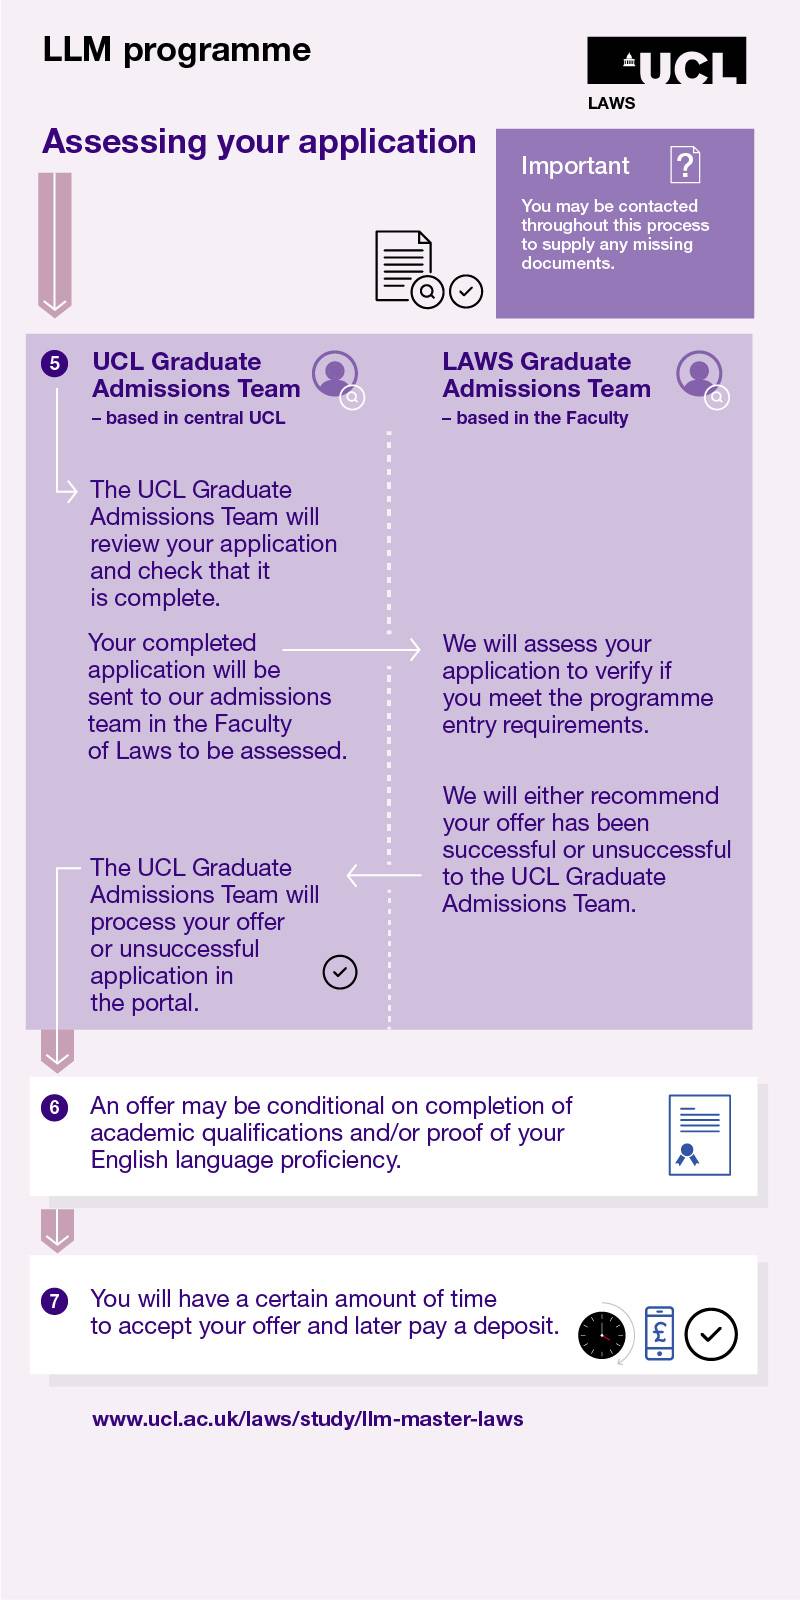 Application will be reviewed by the UCL Graduate Admissions team to check it is complete; sent to the UCL Laws admissions team to be assessed; offer may be conditional on completion of qualification; you will have time to accept your offer & pay a deposit